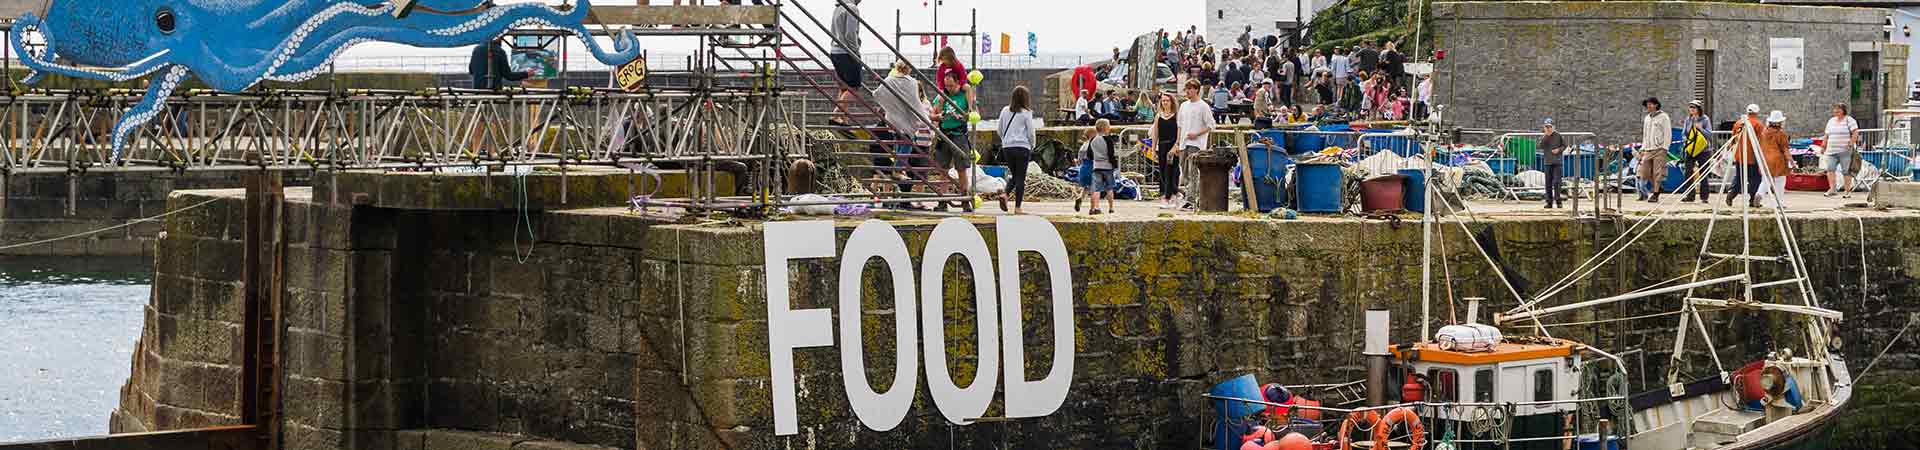 Activities for foodies in Cornwall